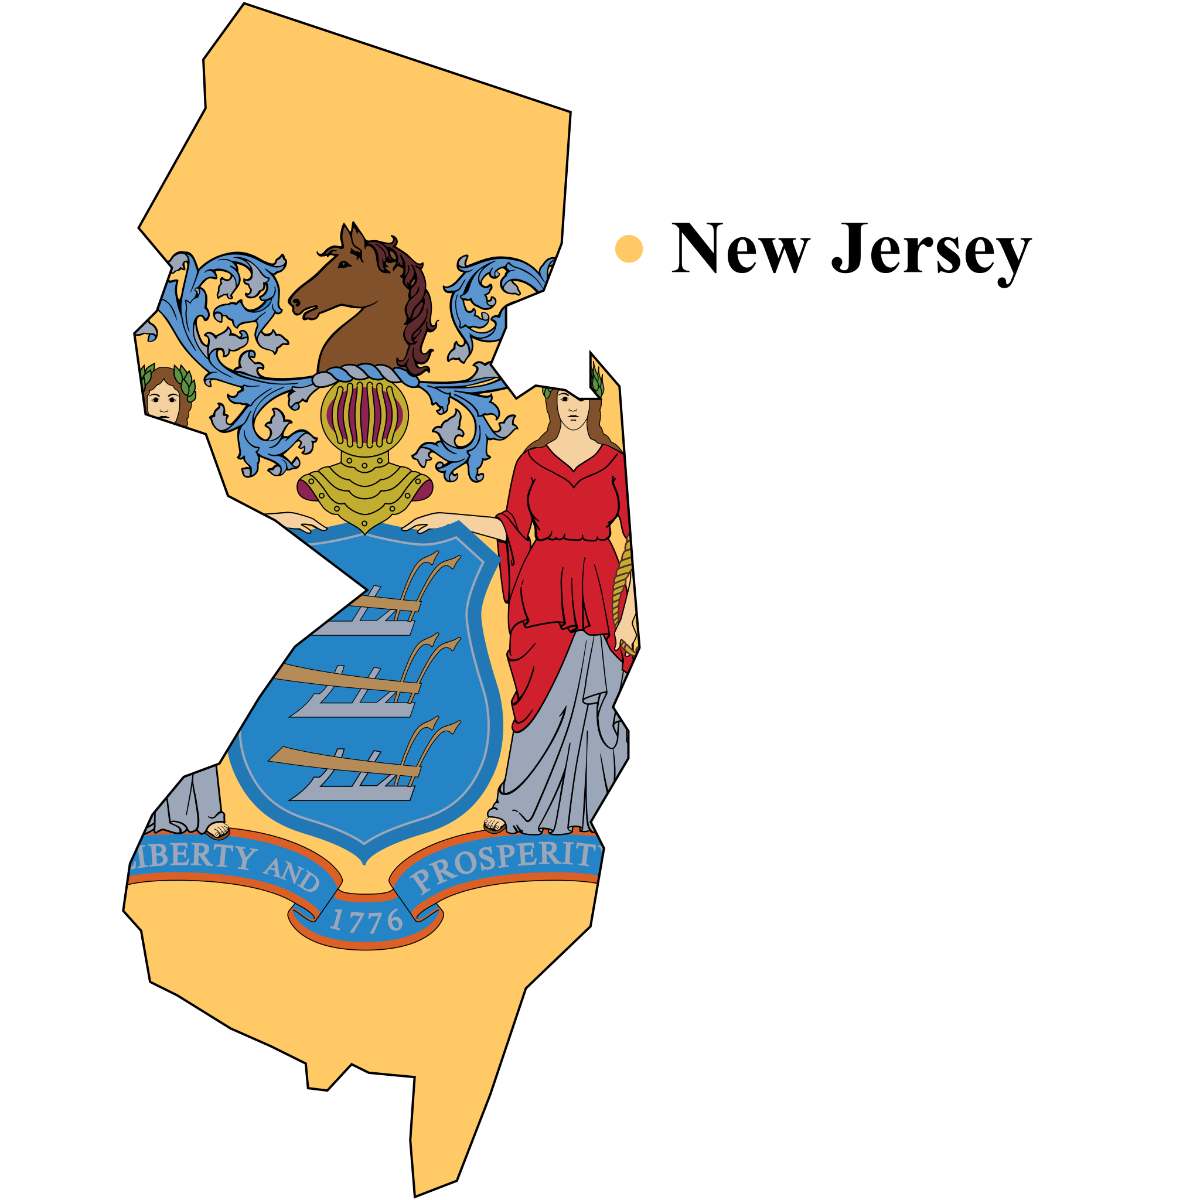 New Jersey State map cutout with New Jersey flag superimposed